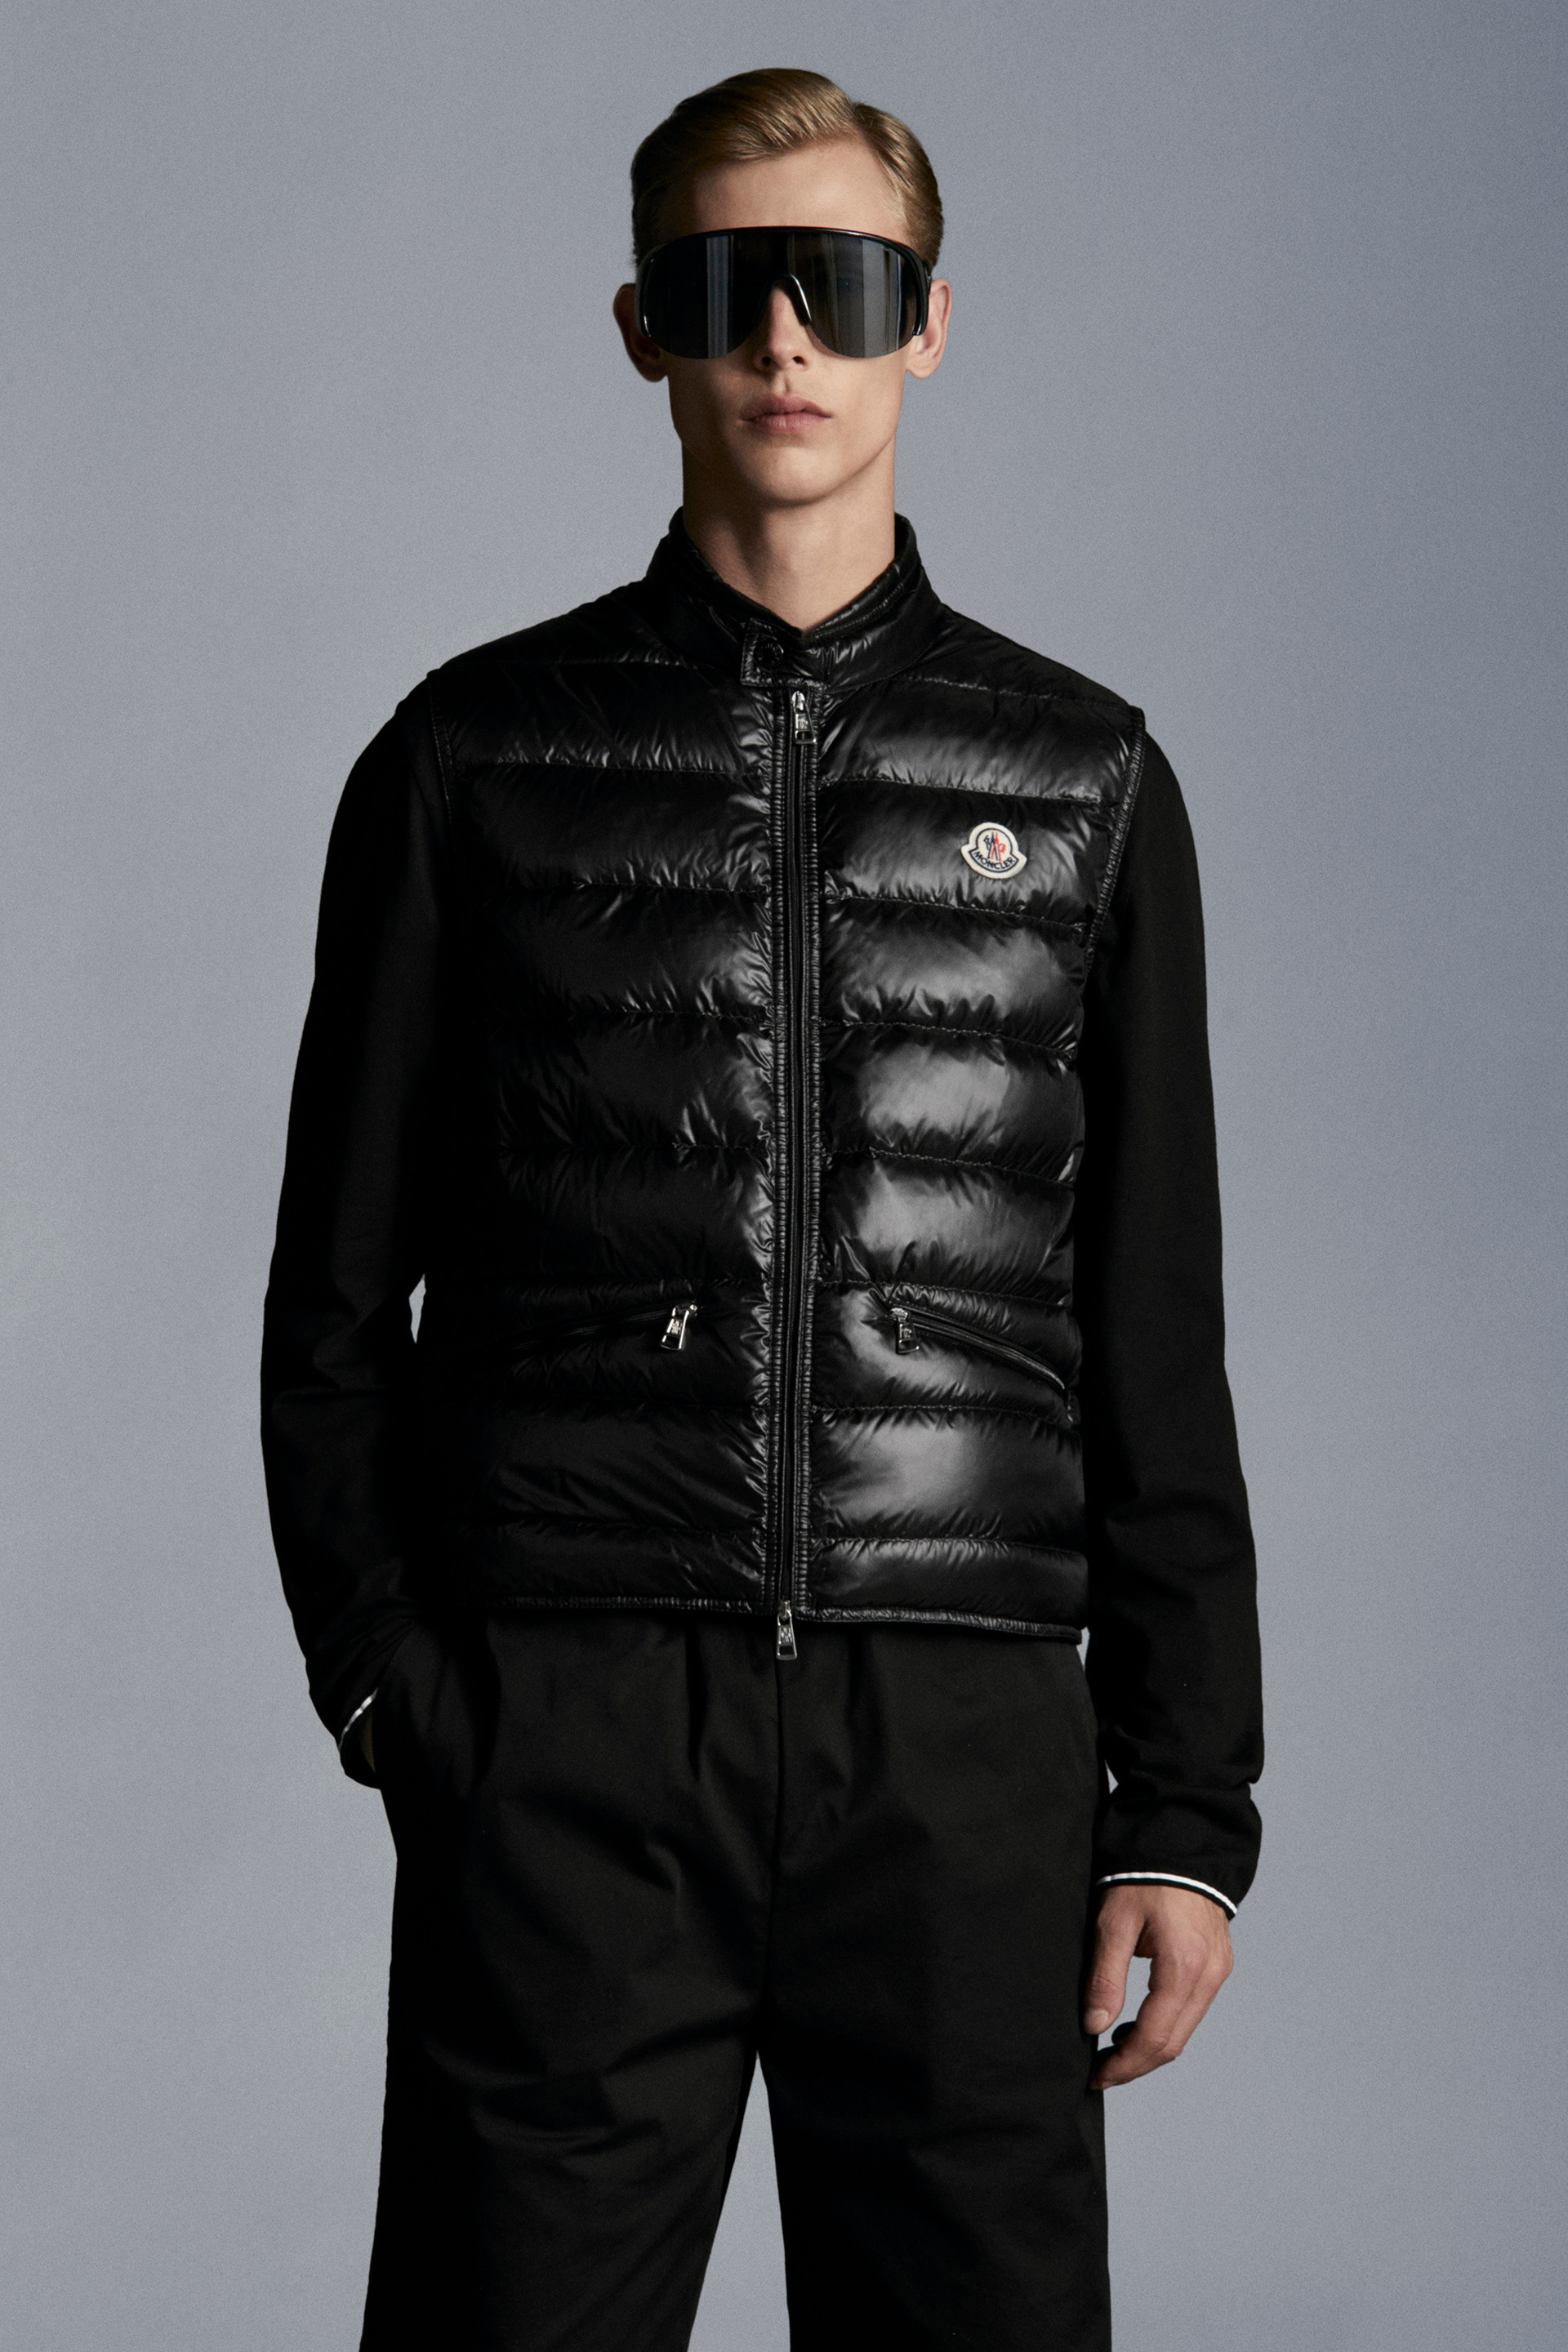 All Down Jackets for Men - Outerwear | Moncler CZ